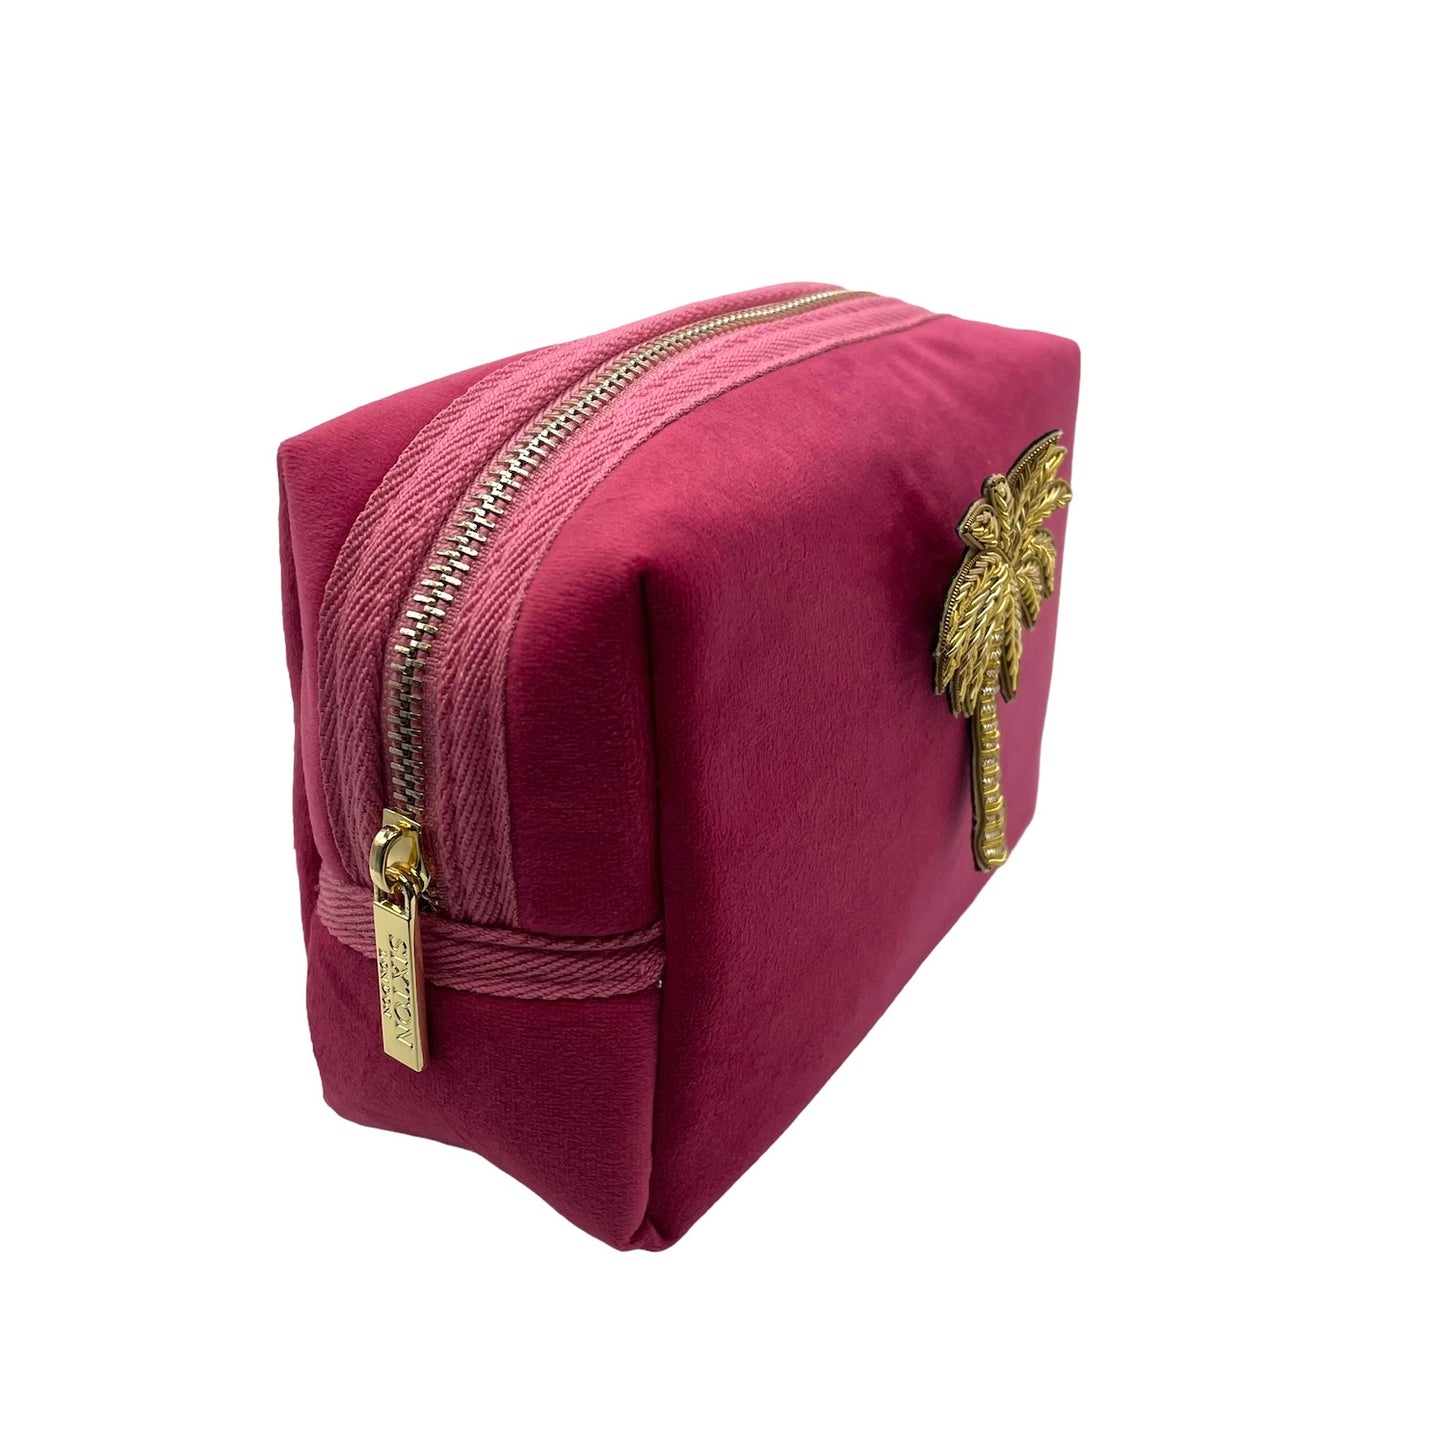 Bright pink make-up bag & palm tree pin - recycled velvet